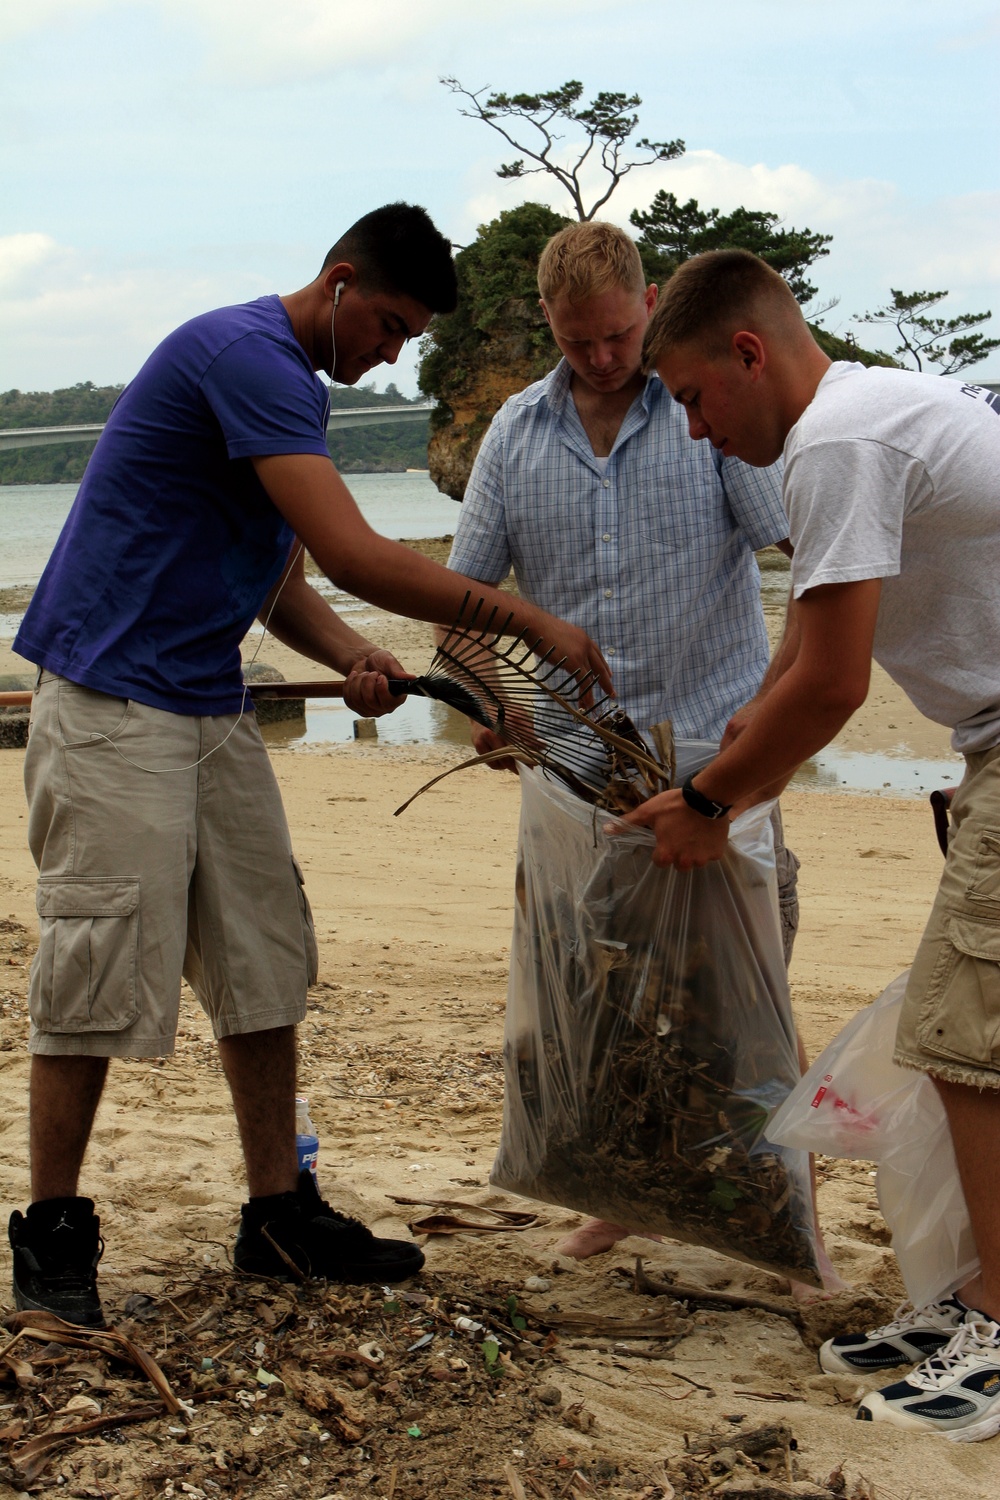 Cleanup in Okinawa